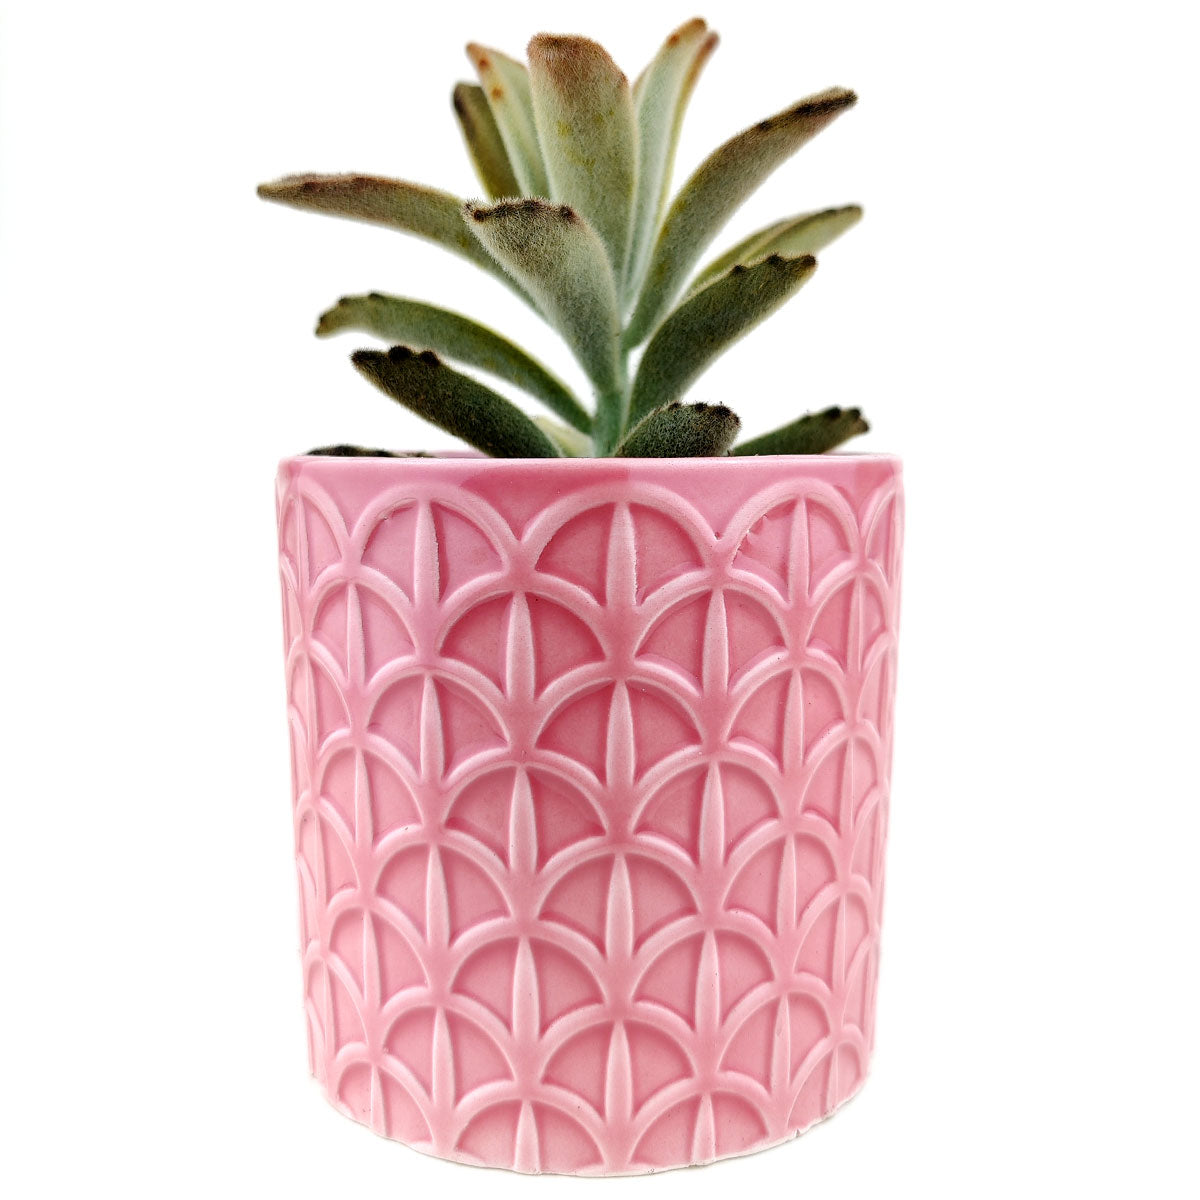 Pink Cathedral Pot for sale, ceramic vase for home decor, ceramic succulent and cactus pots for sale, Succulent gift ideas